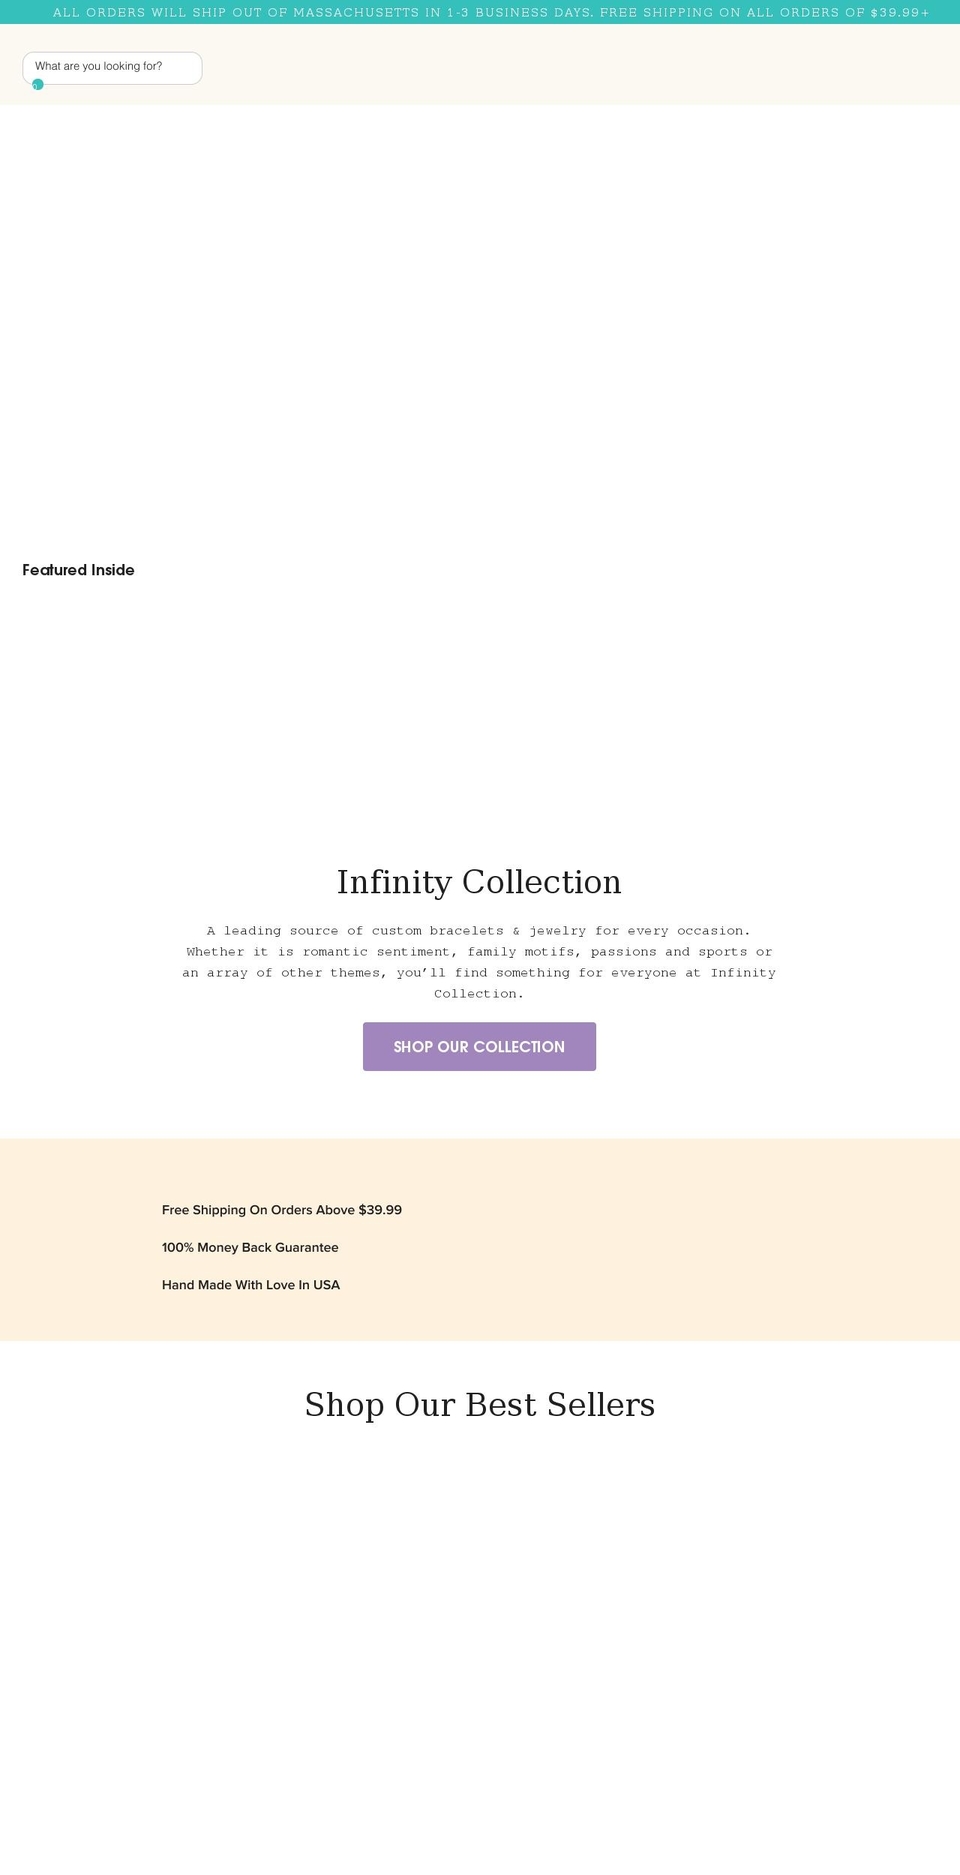 infinit Shopify theme site example infinitycollection.org